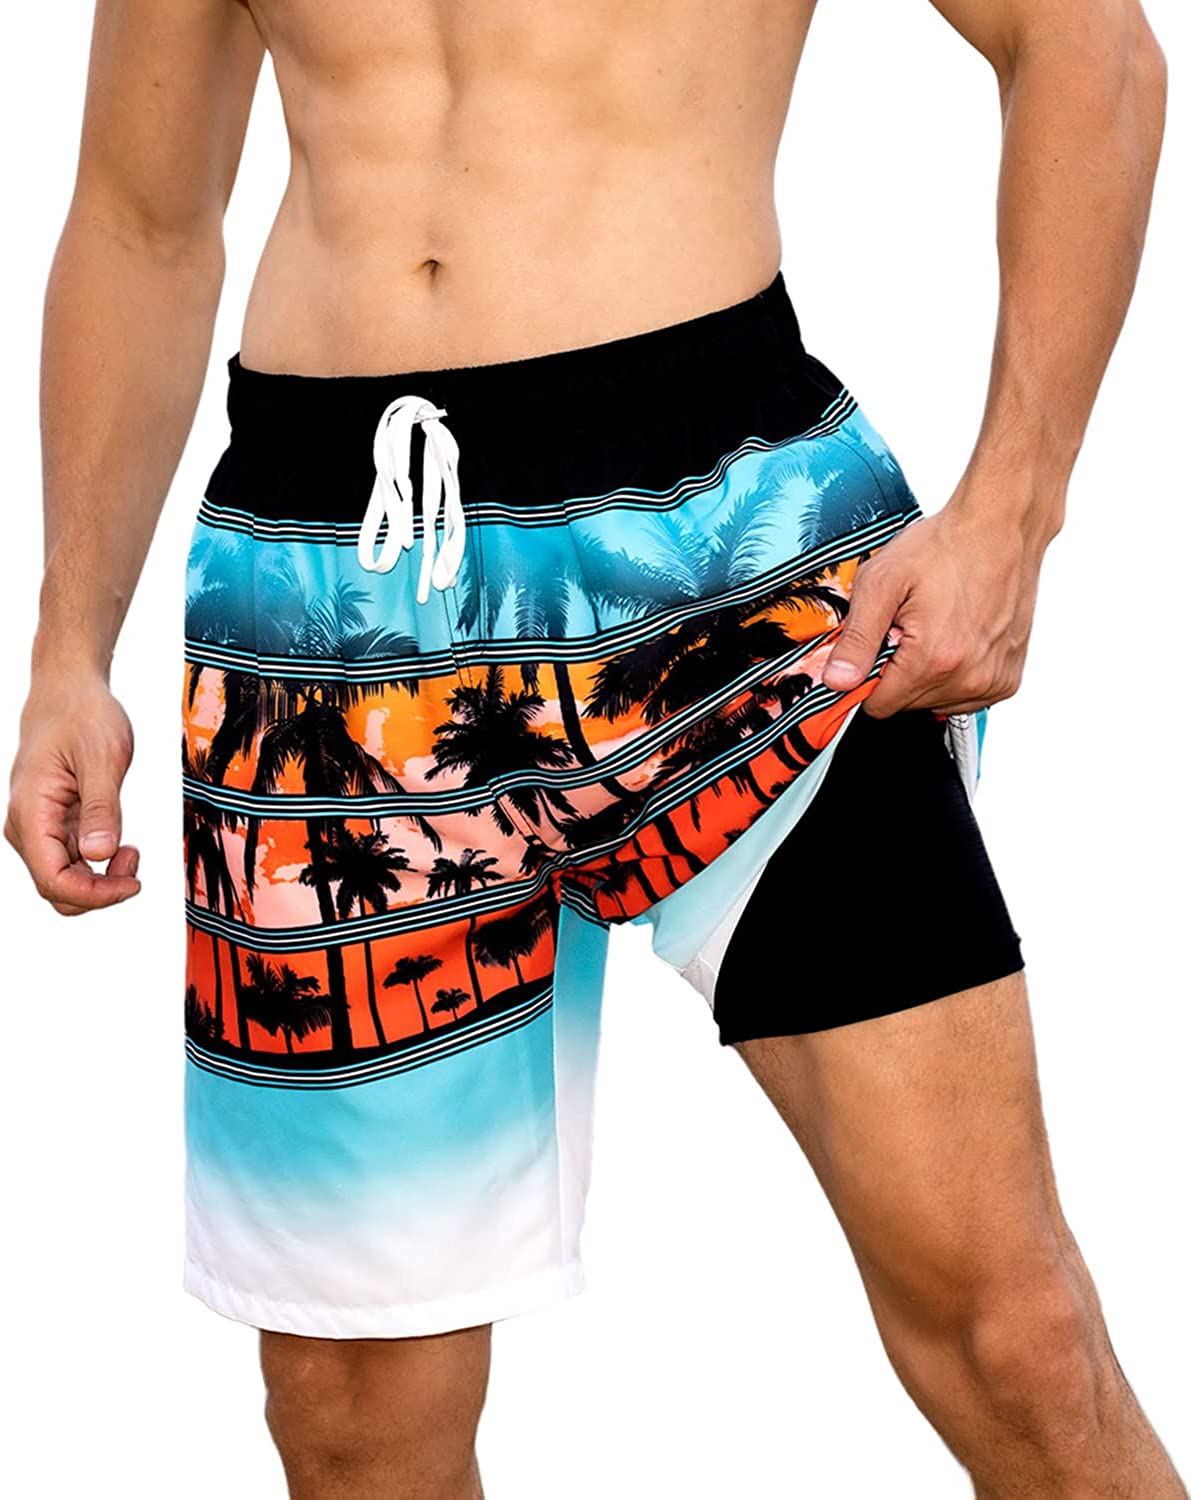  Cozople Mens Swimming Trunks Boxer Brief Liner Surfing  Dinosaur Graphic Compression Anti Chafe Swimsuit Bathing Suit For Men No  Mesh Lining Beach Board Shorts